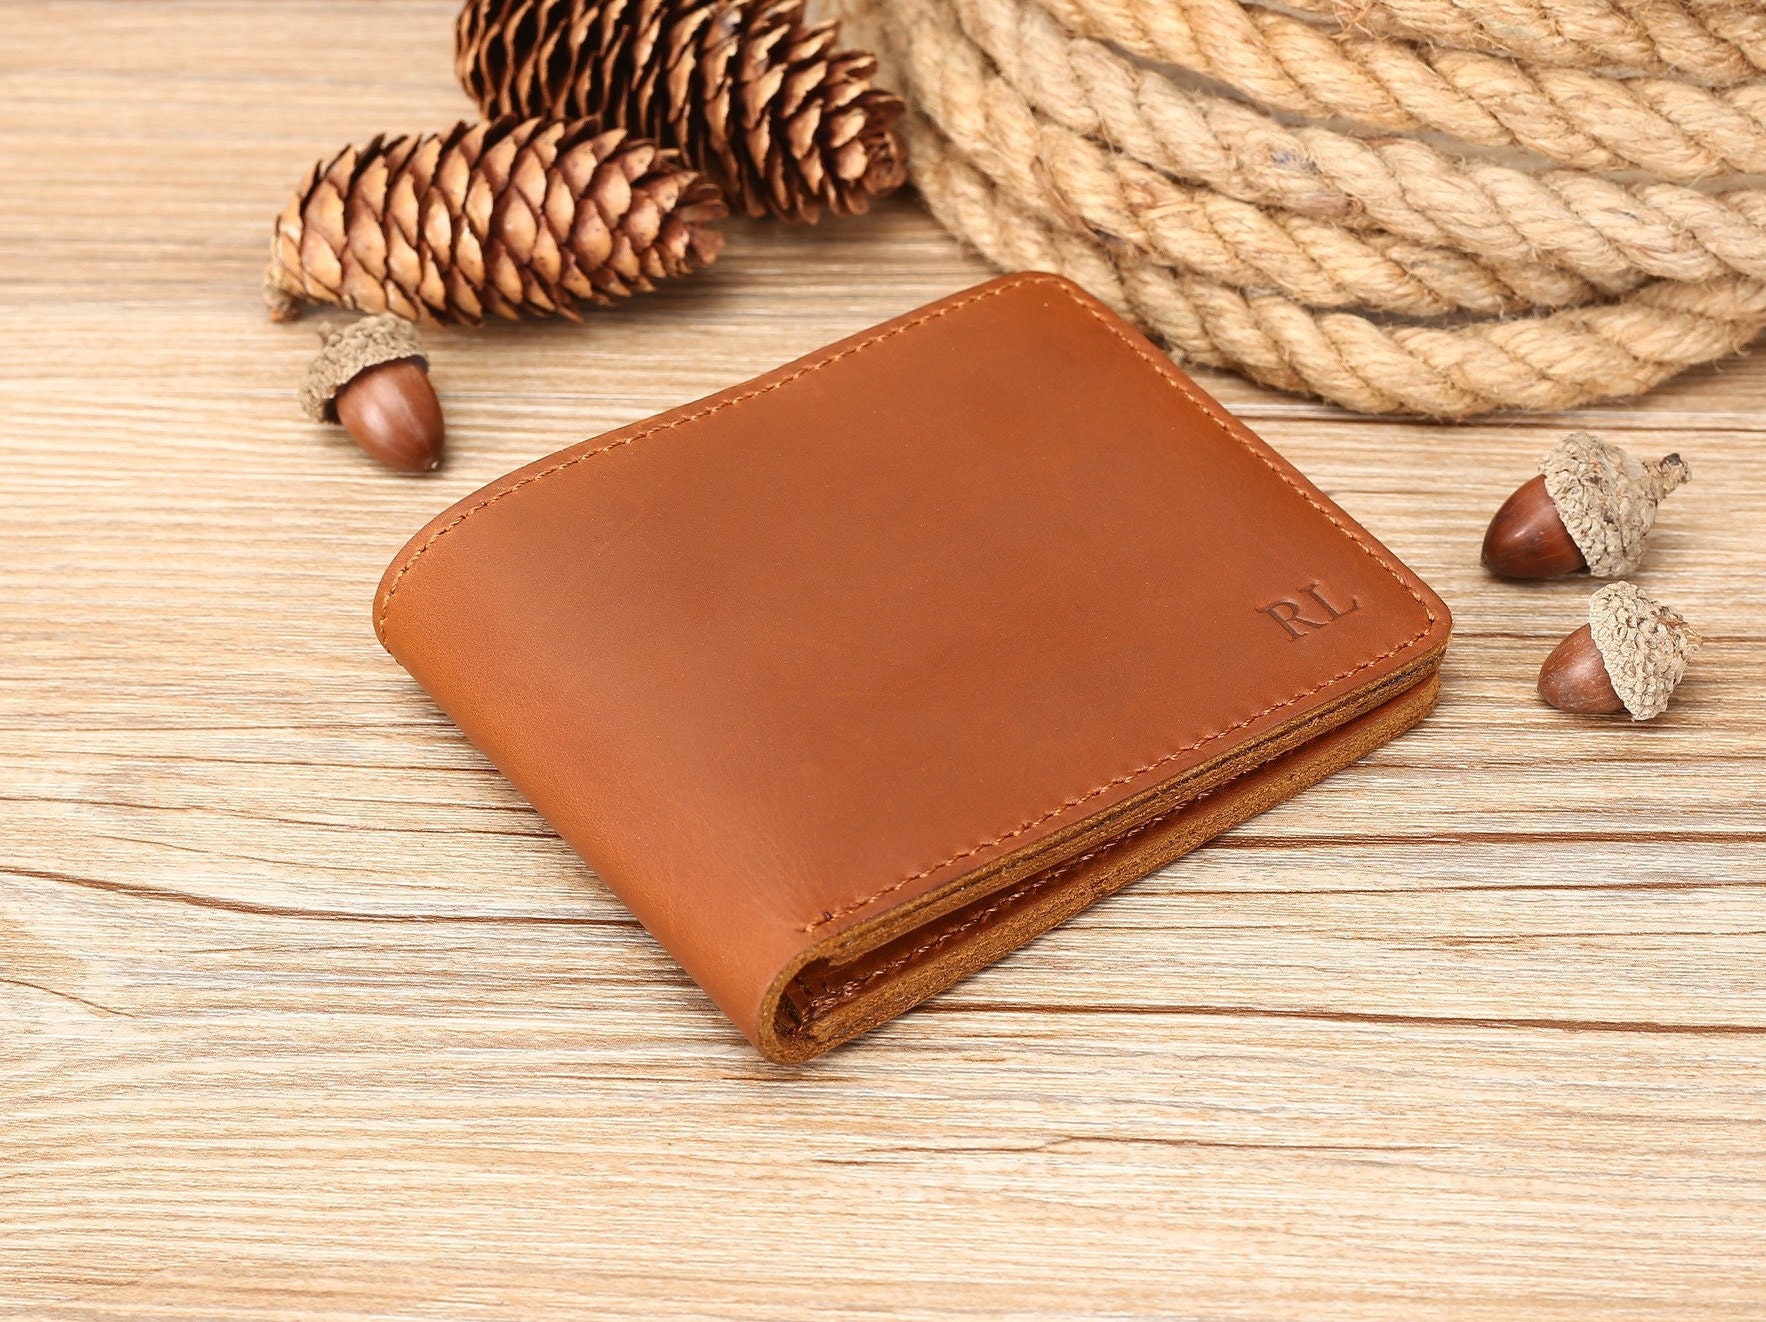 Minimal Leather Wallet - USA Made, Leather Chain Loop Strap, Tan, Monogrammed, Full Grain Leather, Handmade by Mr. Lentz